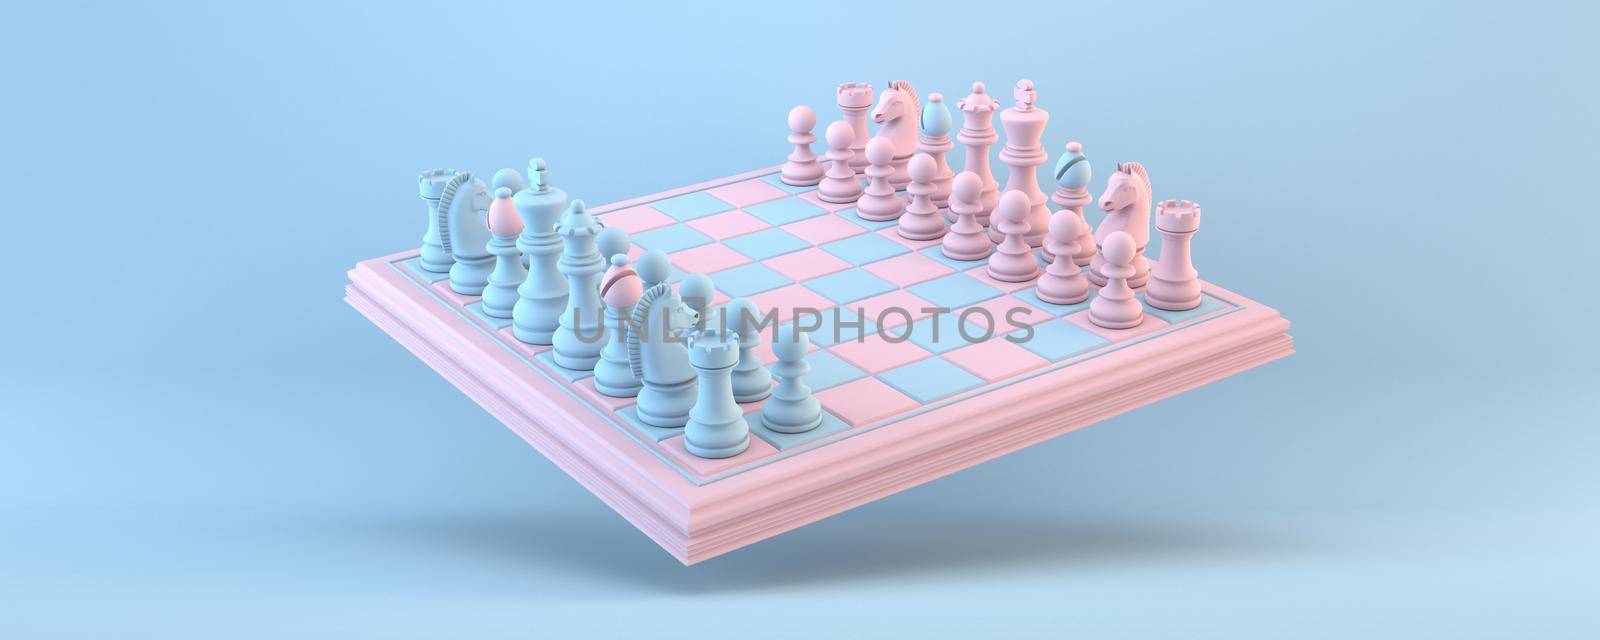 Chess board Starting position 3D rendering illustration isolated on blue background